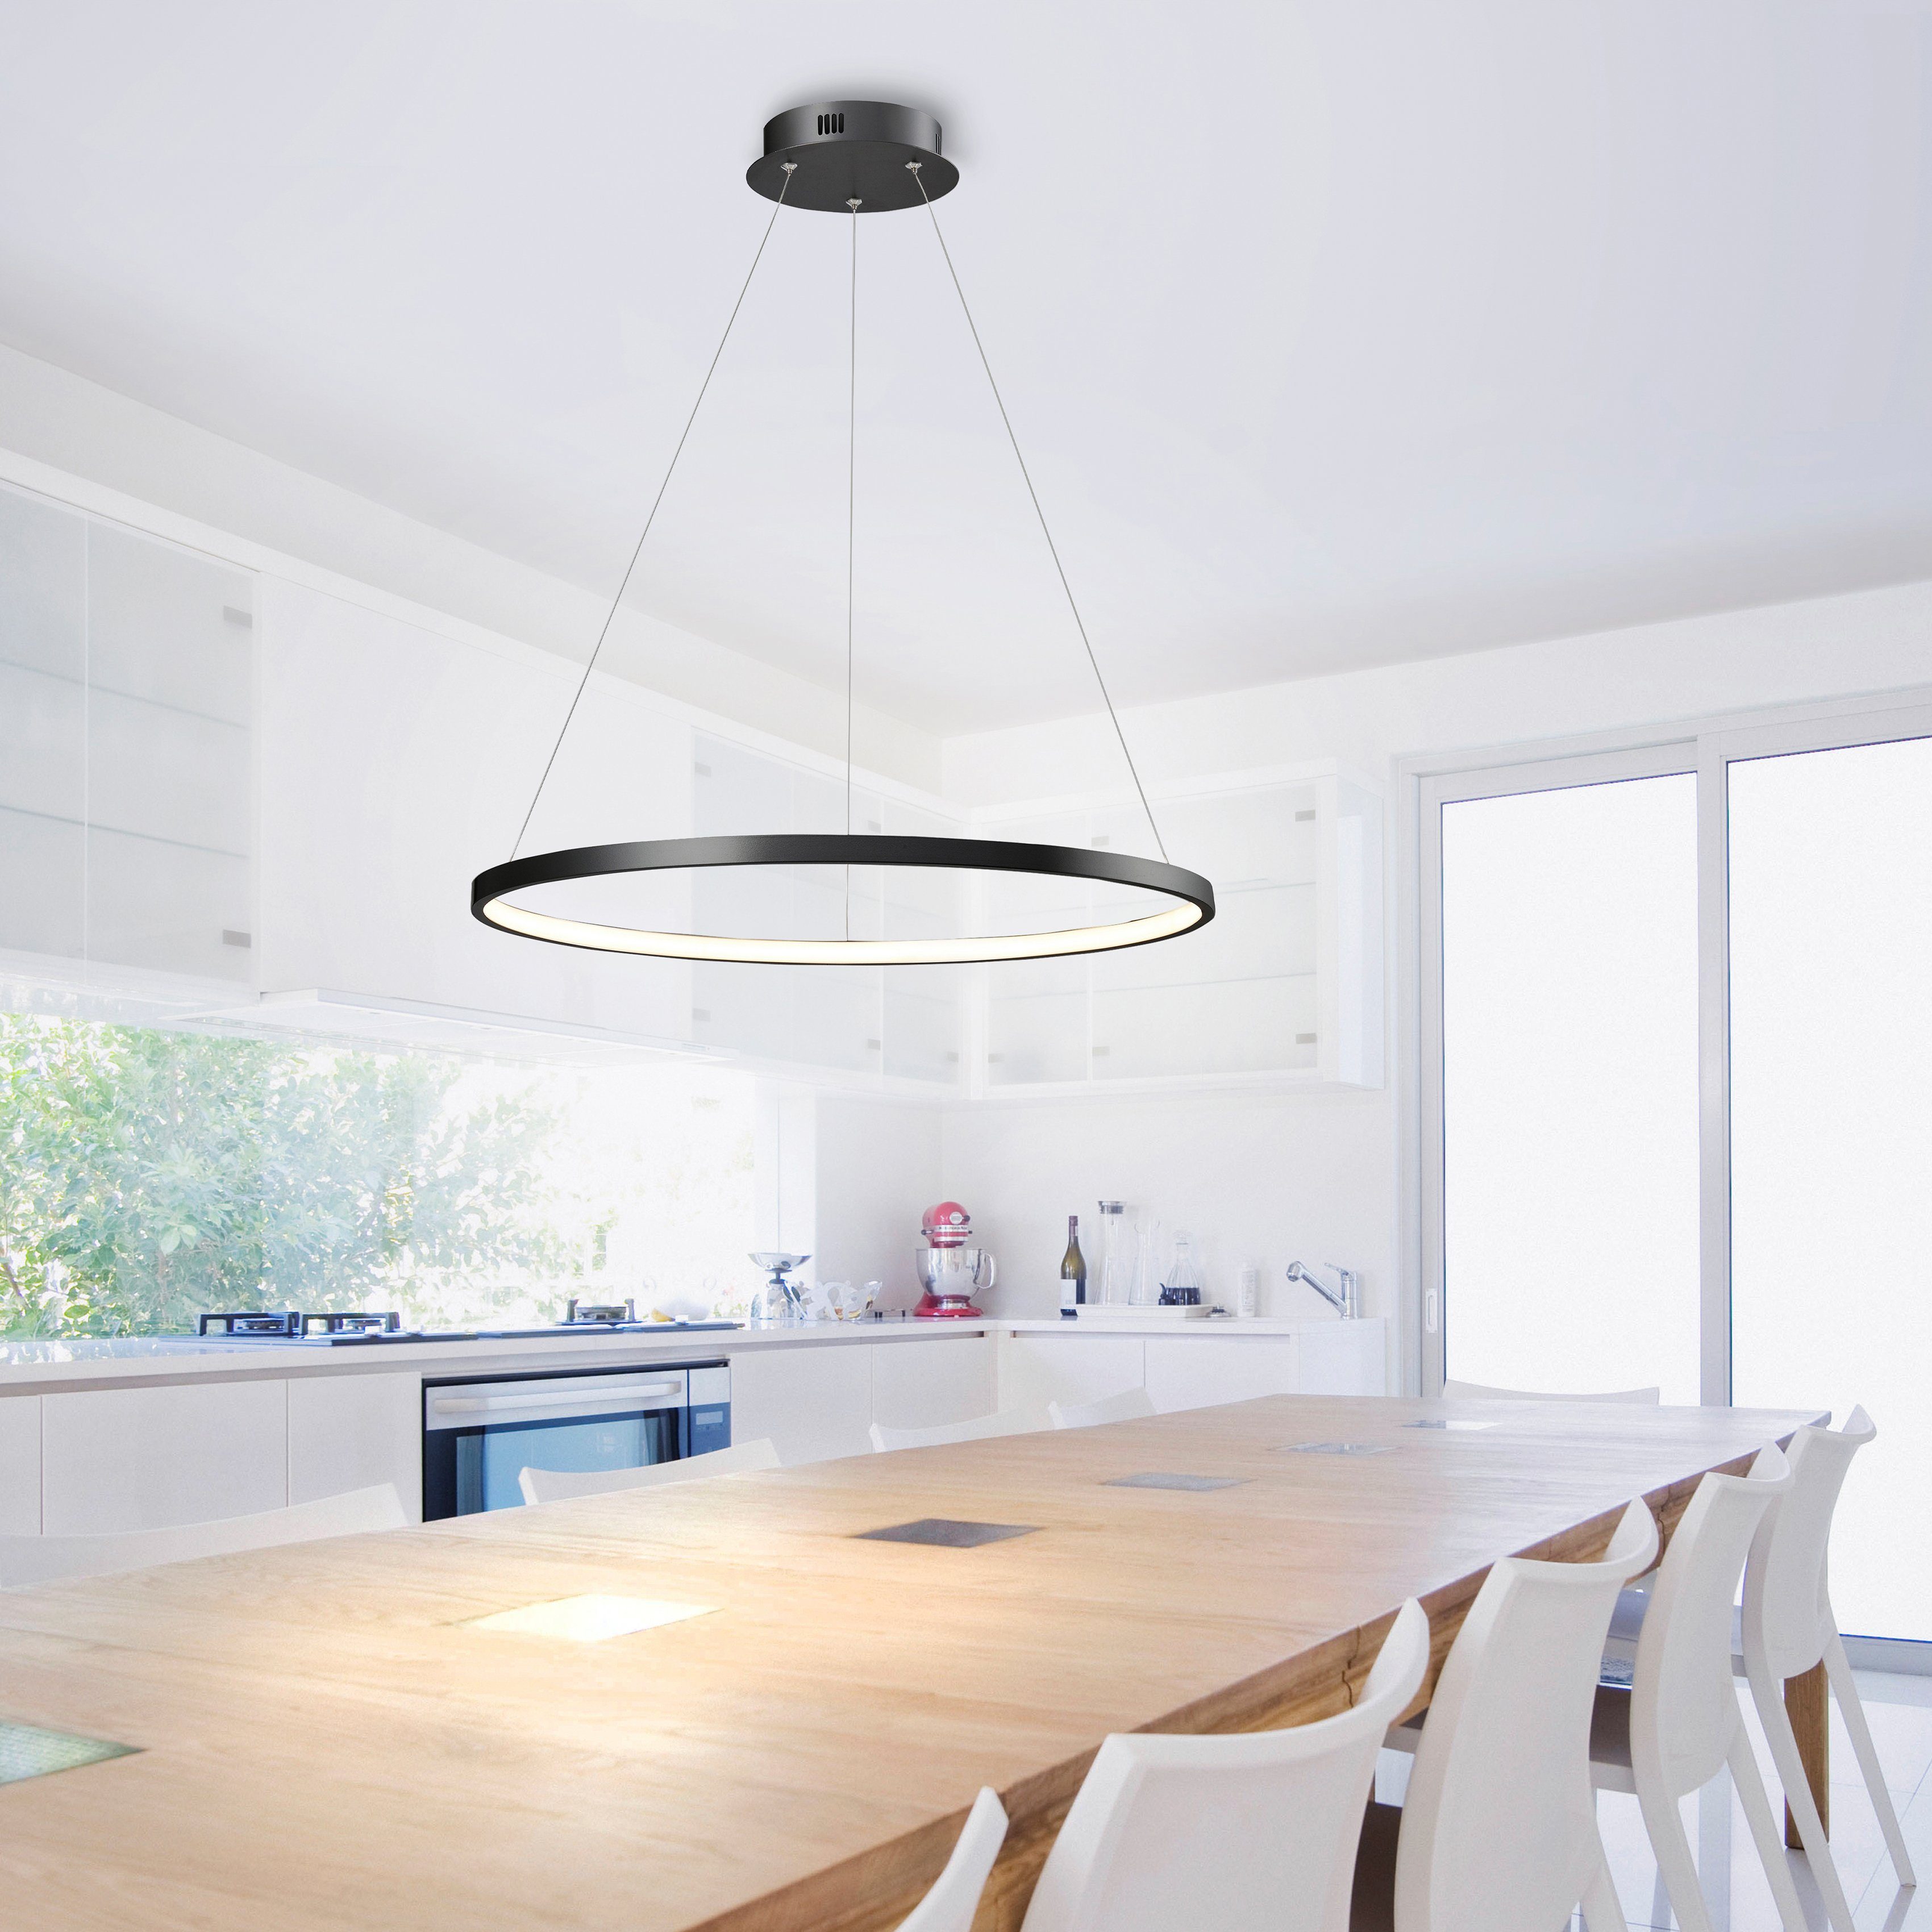 LED of integriert, fest Places LED LED Ring Style Warmweiß, Pendelleuchte Raylan, modern Hängelampe